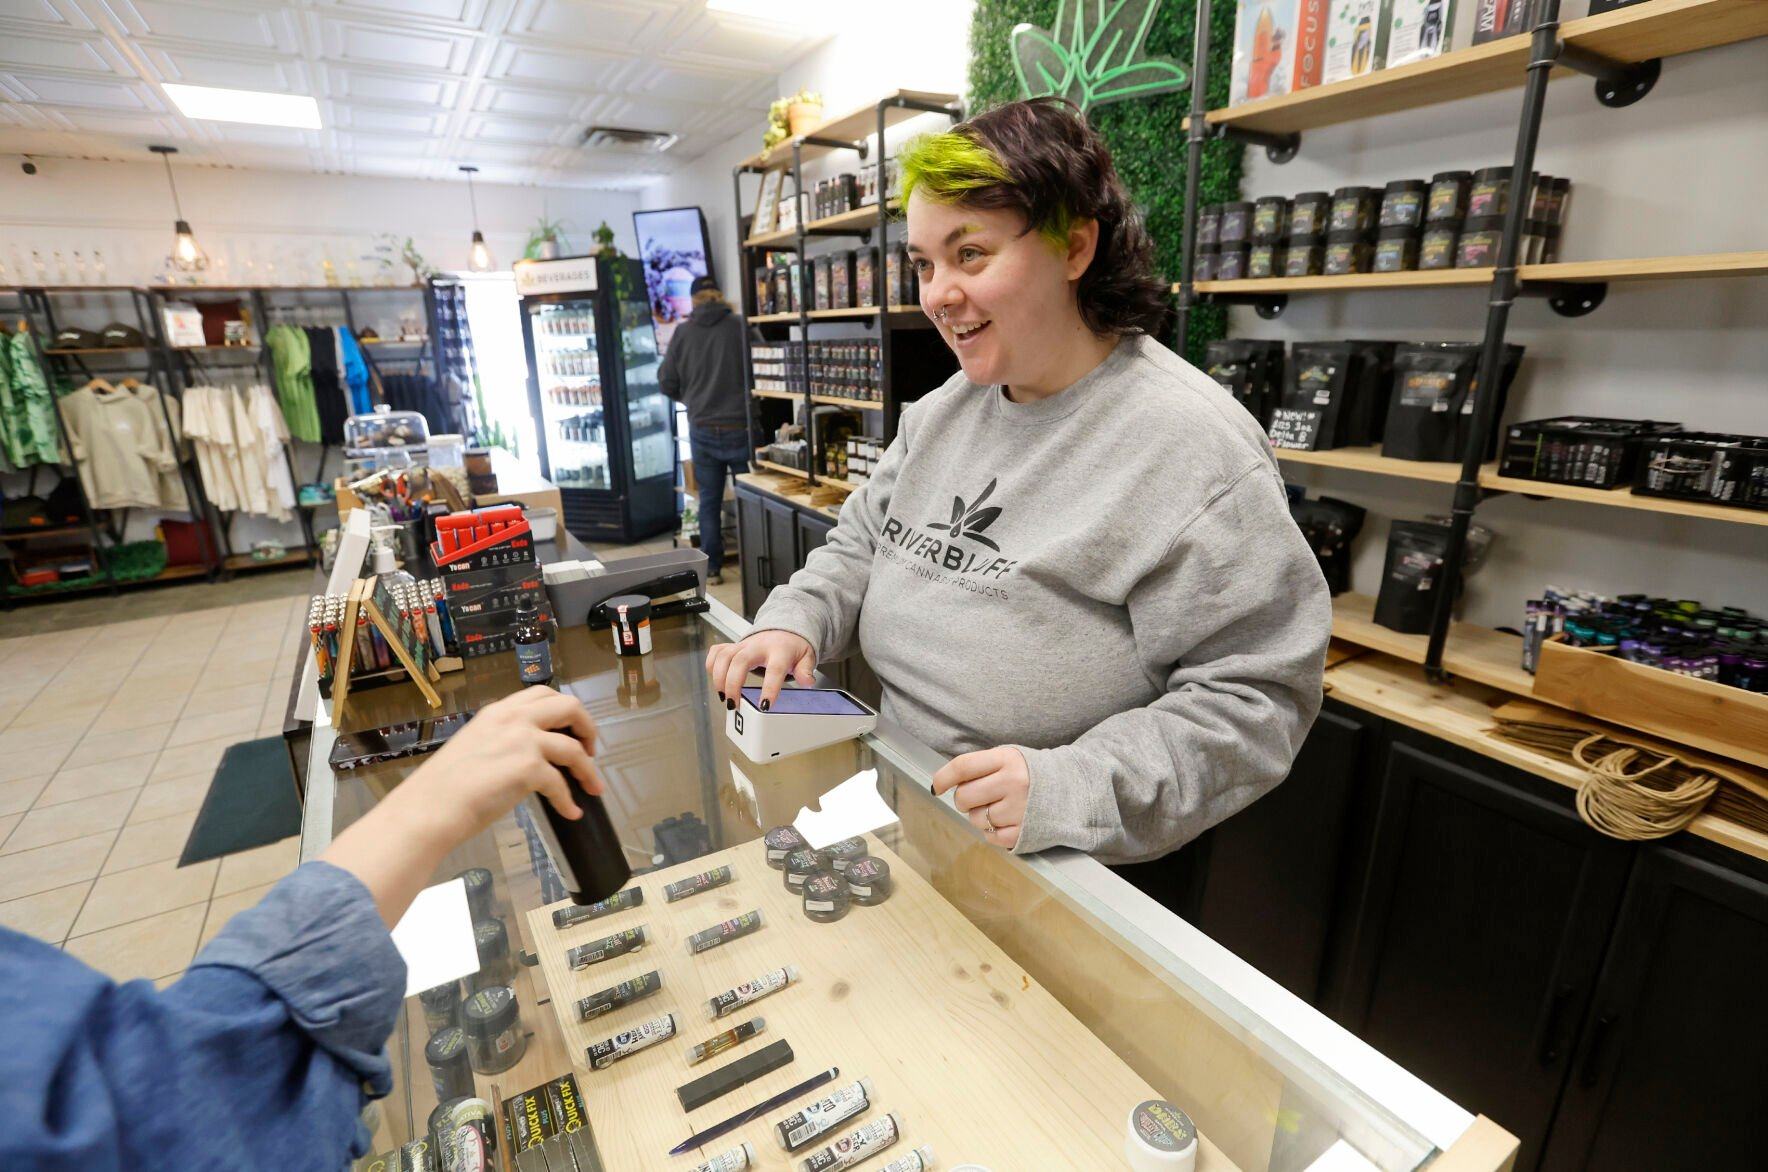 Jasper Allan helps a customer at River Bluff Collective in East Dubuque, Ill. The locally-based cannabis company recently opened its first dispensary in Roselle, Ill.    PHOTO CREDIT: JESSICA REILLY
Telegraph Herald